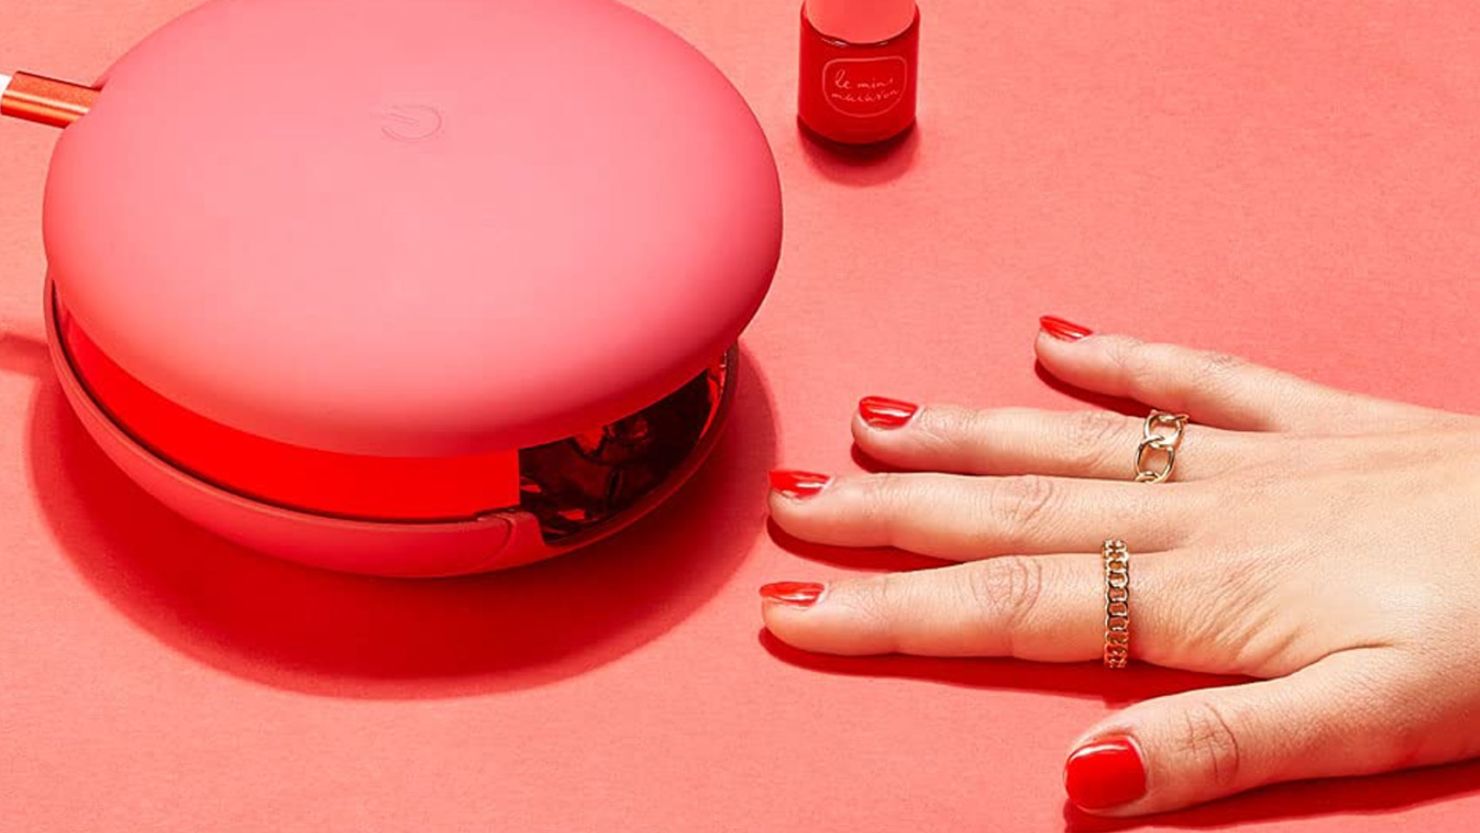 How to Remove Gel Nail Polish the Right Way, According to Experts